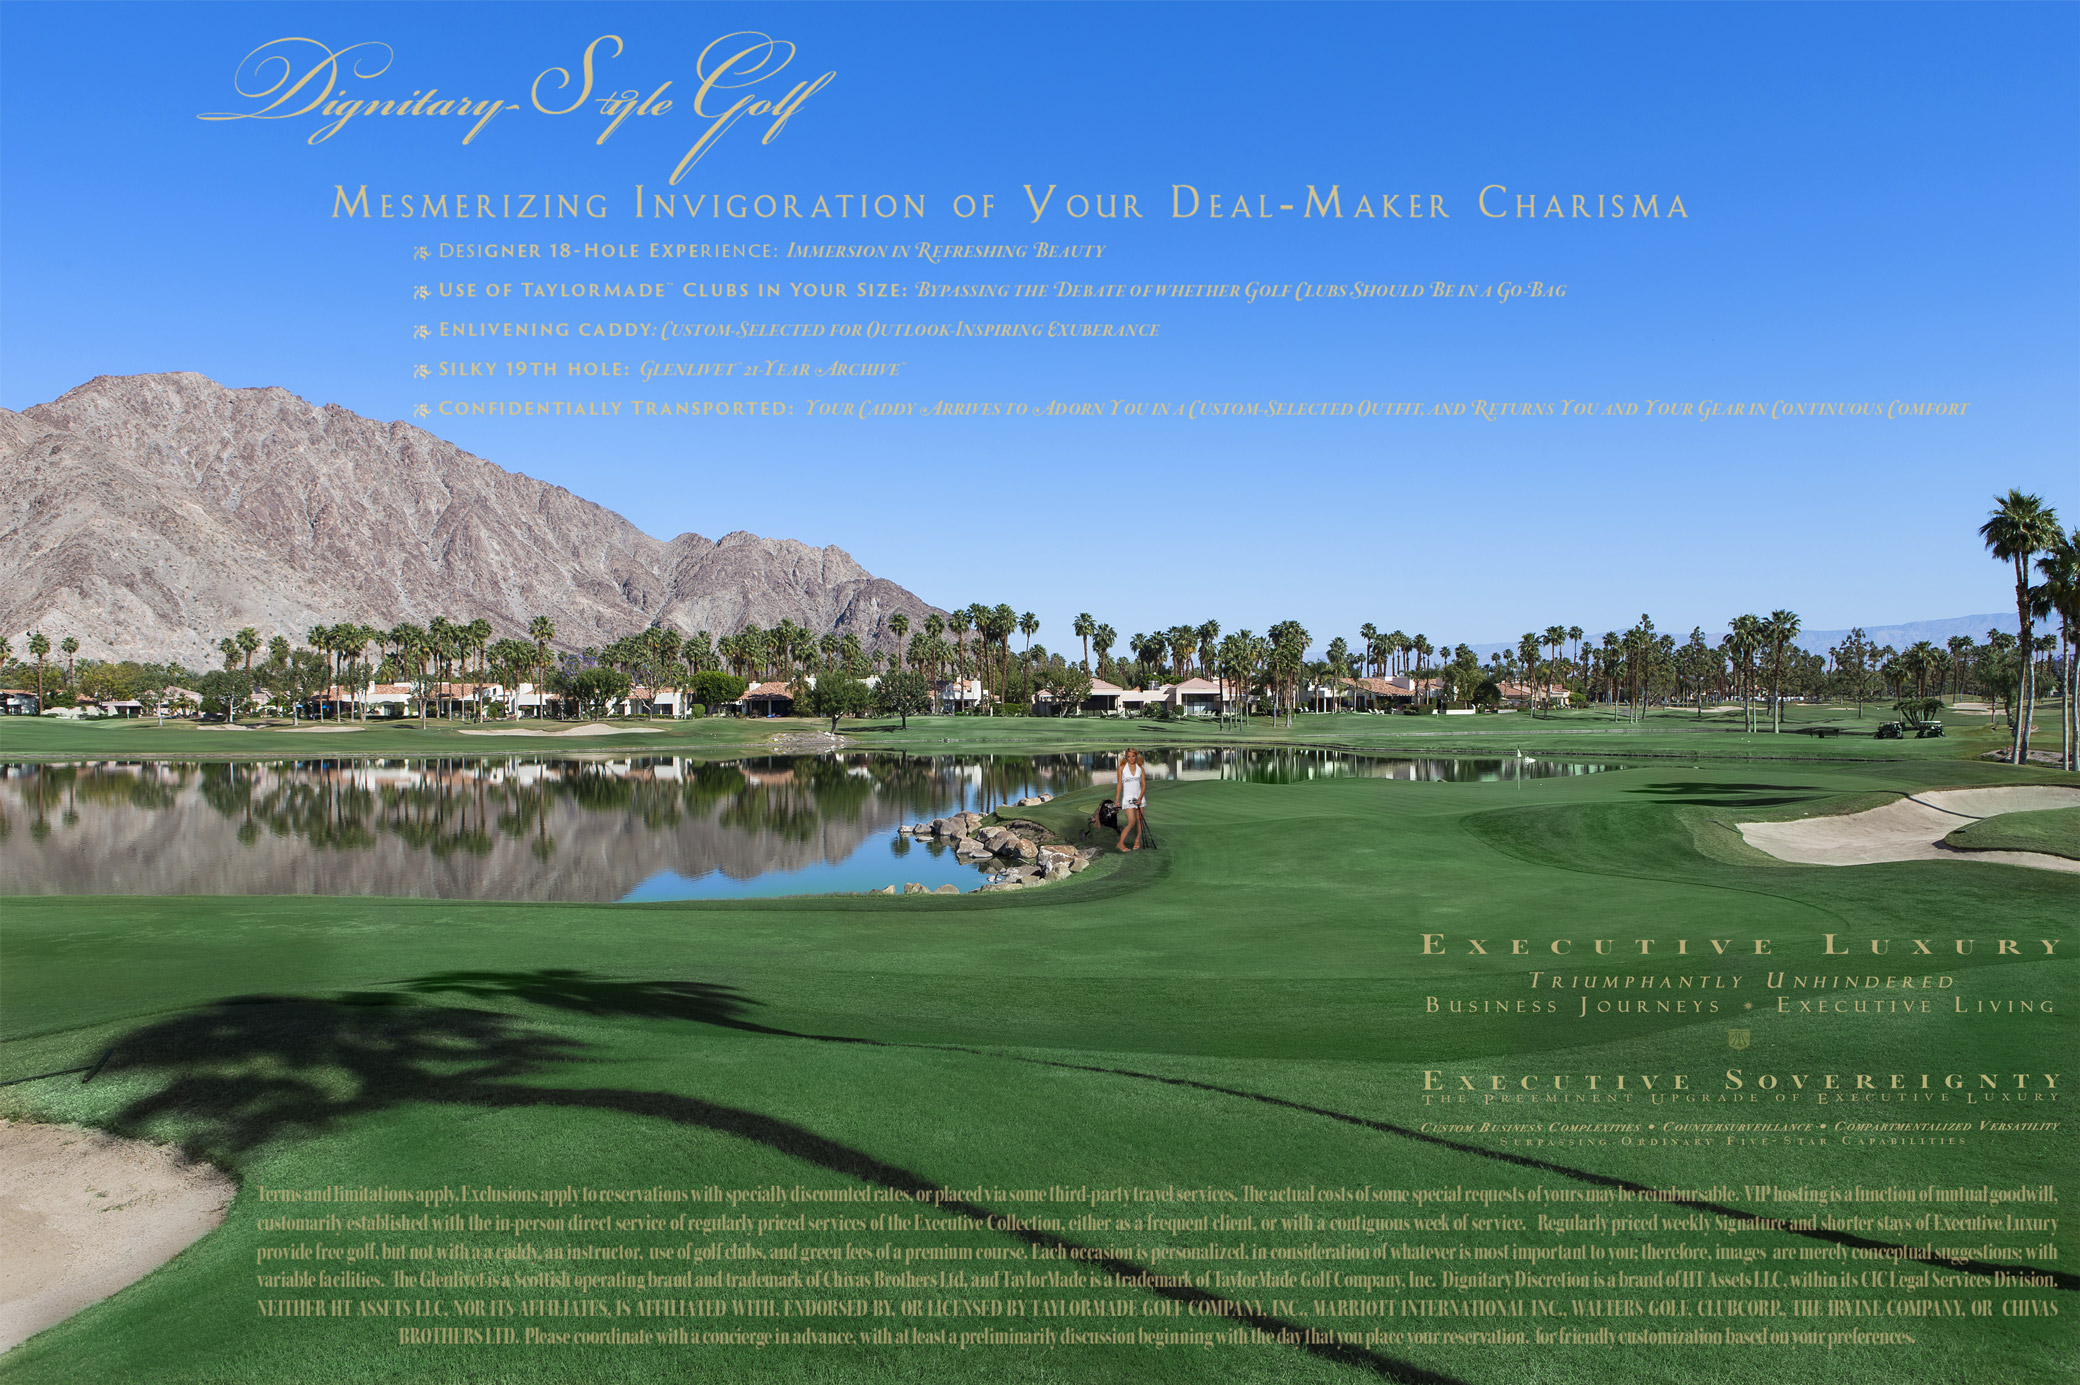 Complimentary VIP Golf Excursion